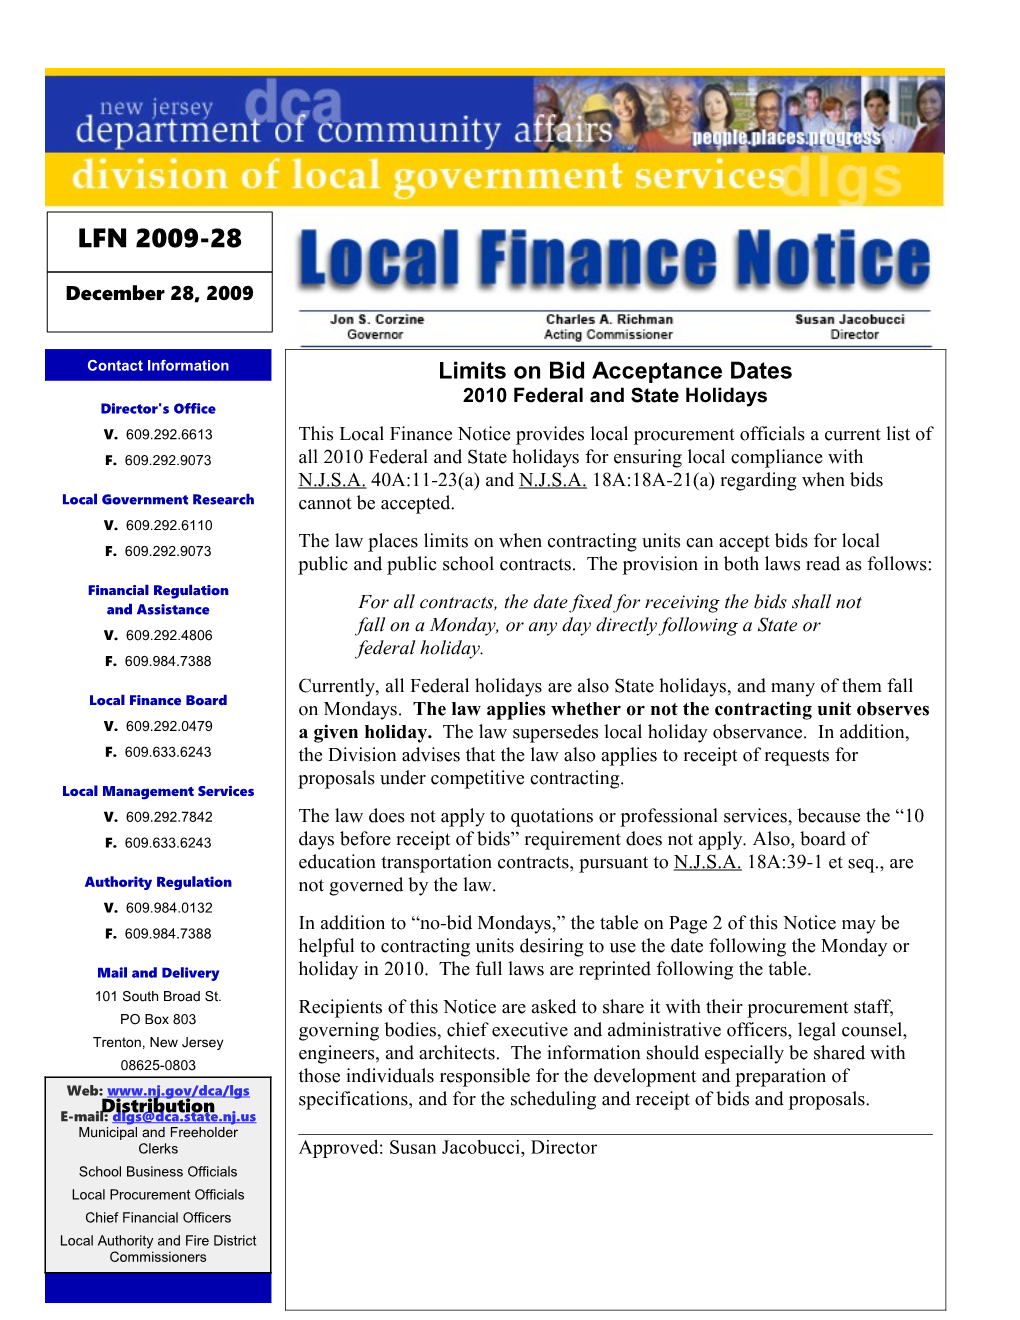 Local Finance Notice 2009-27December 28, 2009Page 1